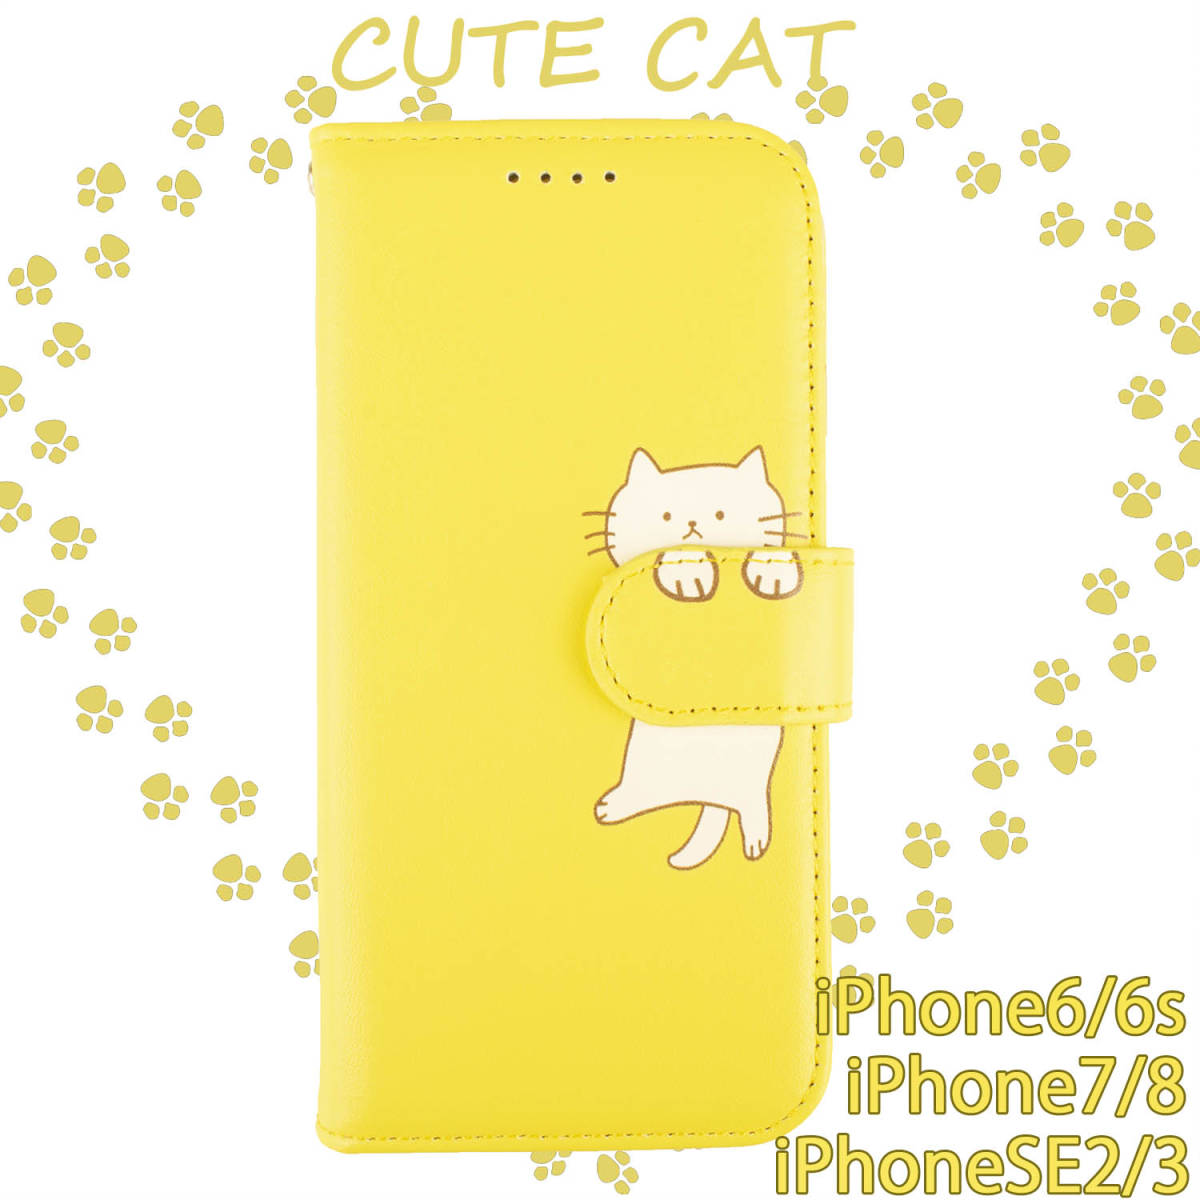 iPhoneSE case notebook type lovely SE iPhone8 case iPhone7 iPhone6s iPhone6 free shipping cover leather popular cat smartphone case yellow color cheap 